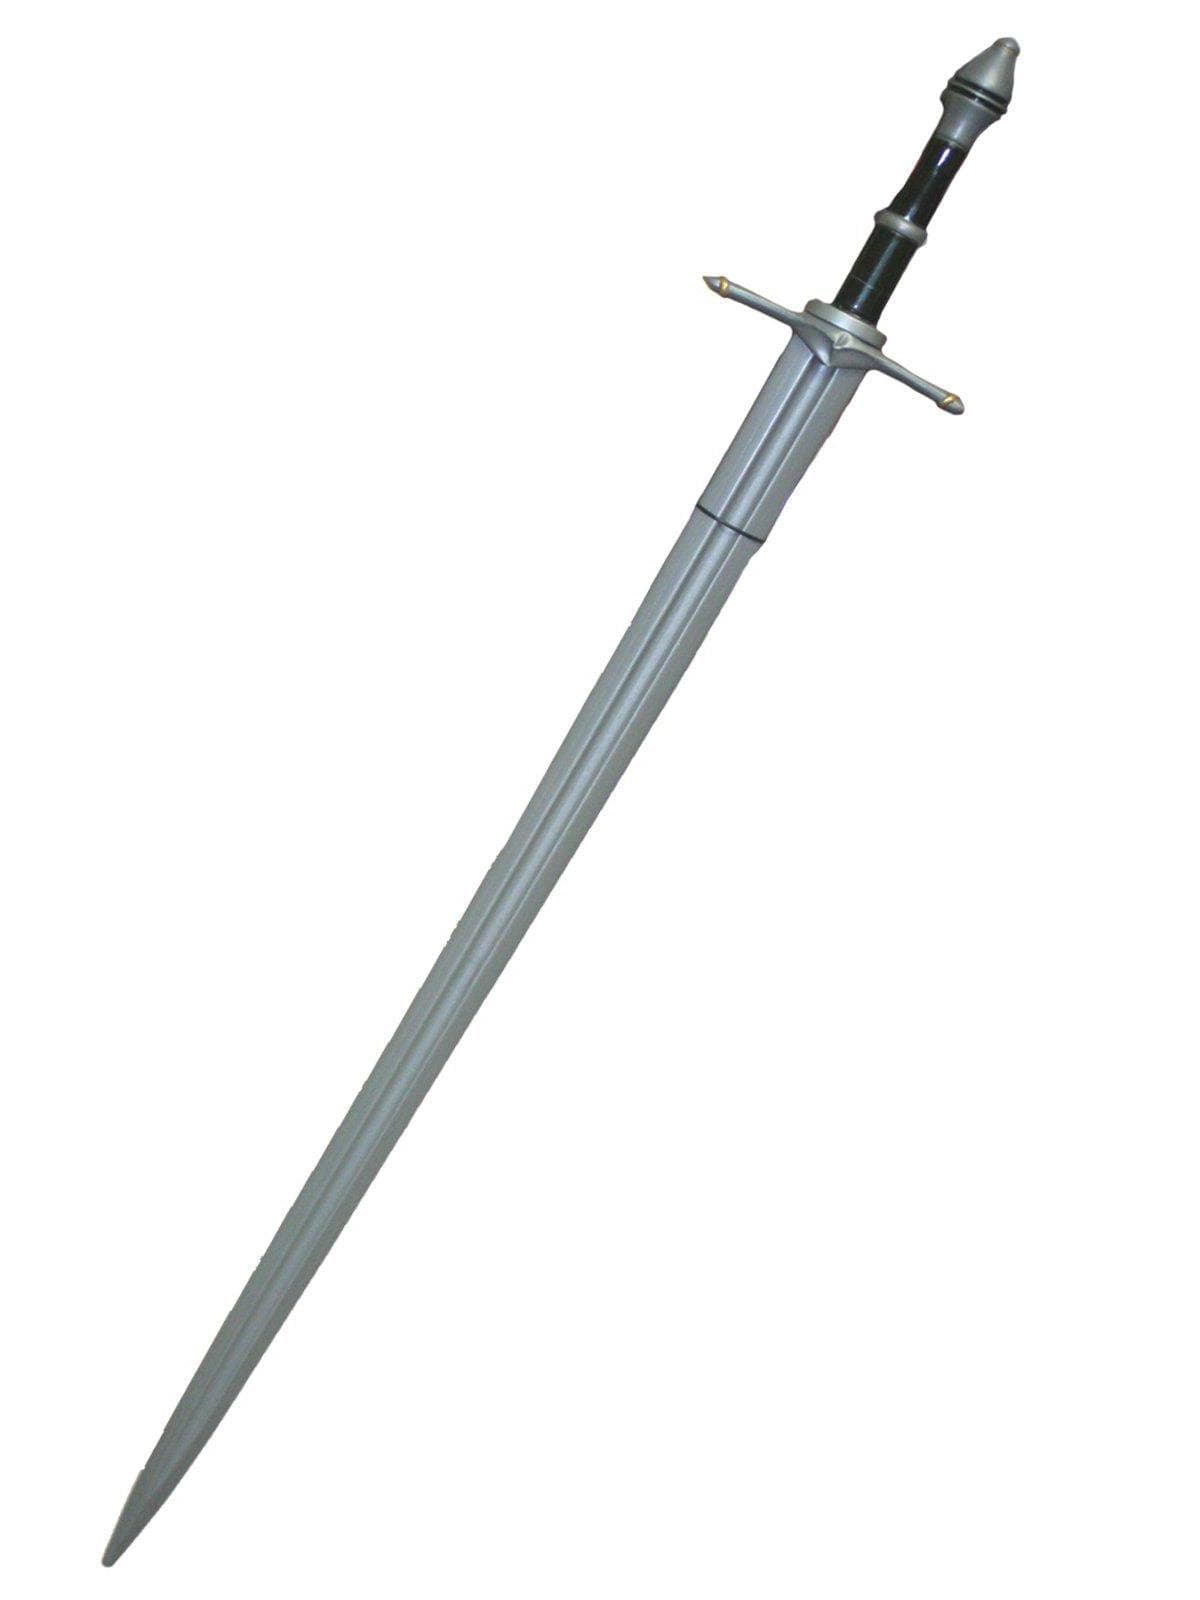 The Lord of the Rings Aragorn Sword Costume Accessory